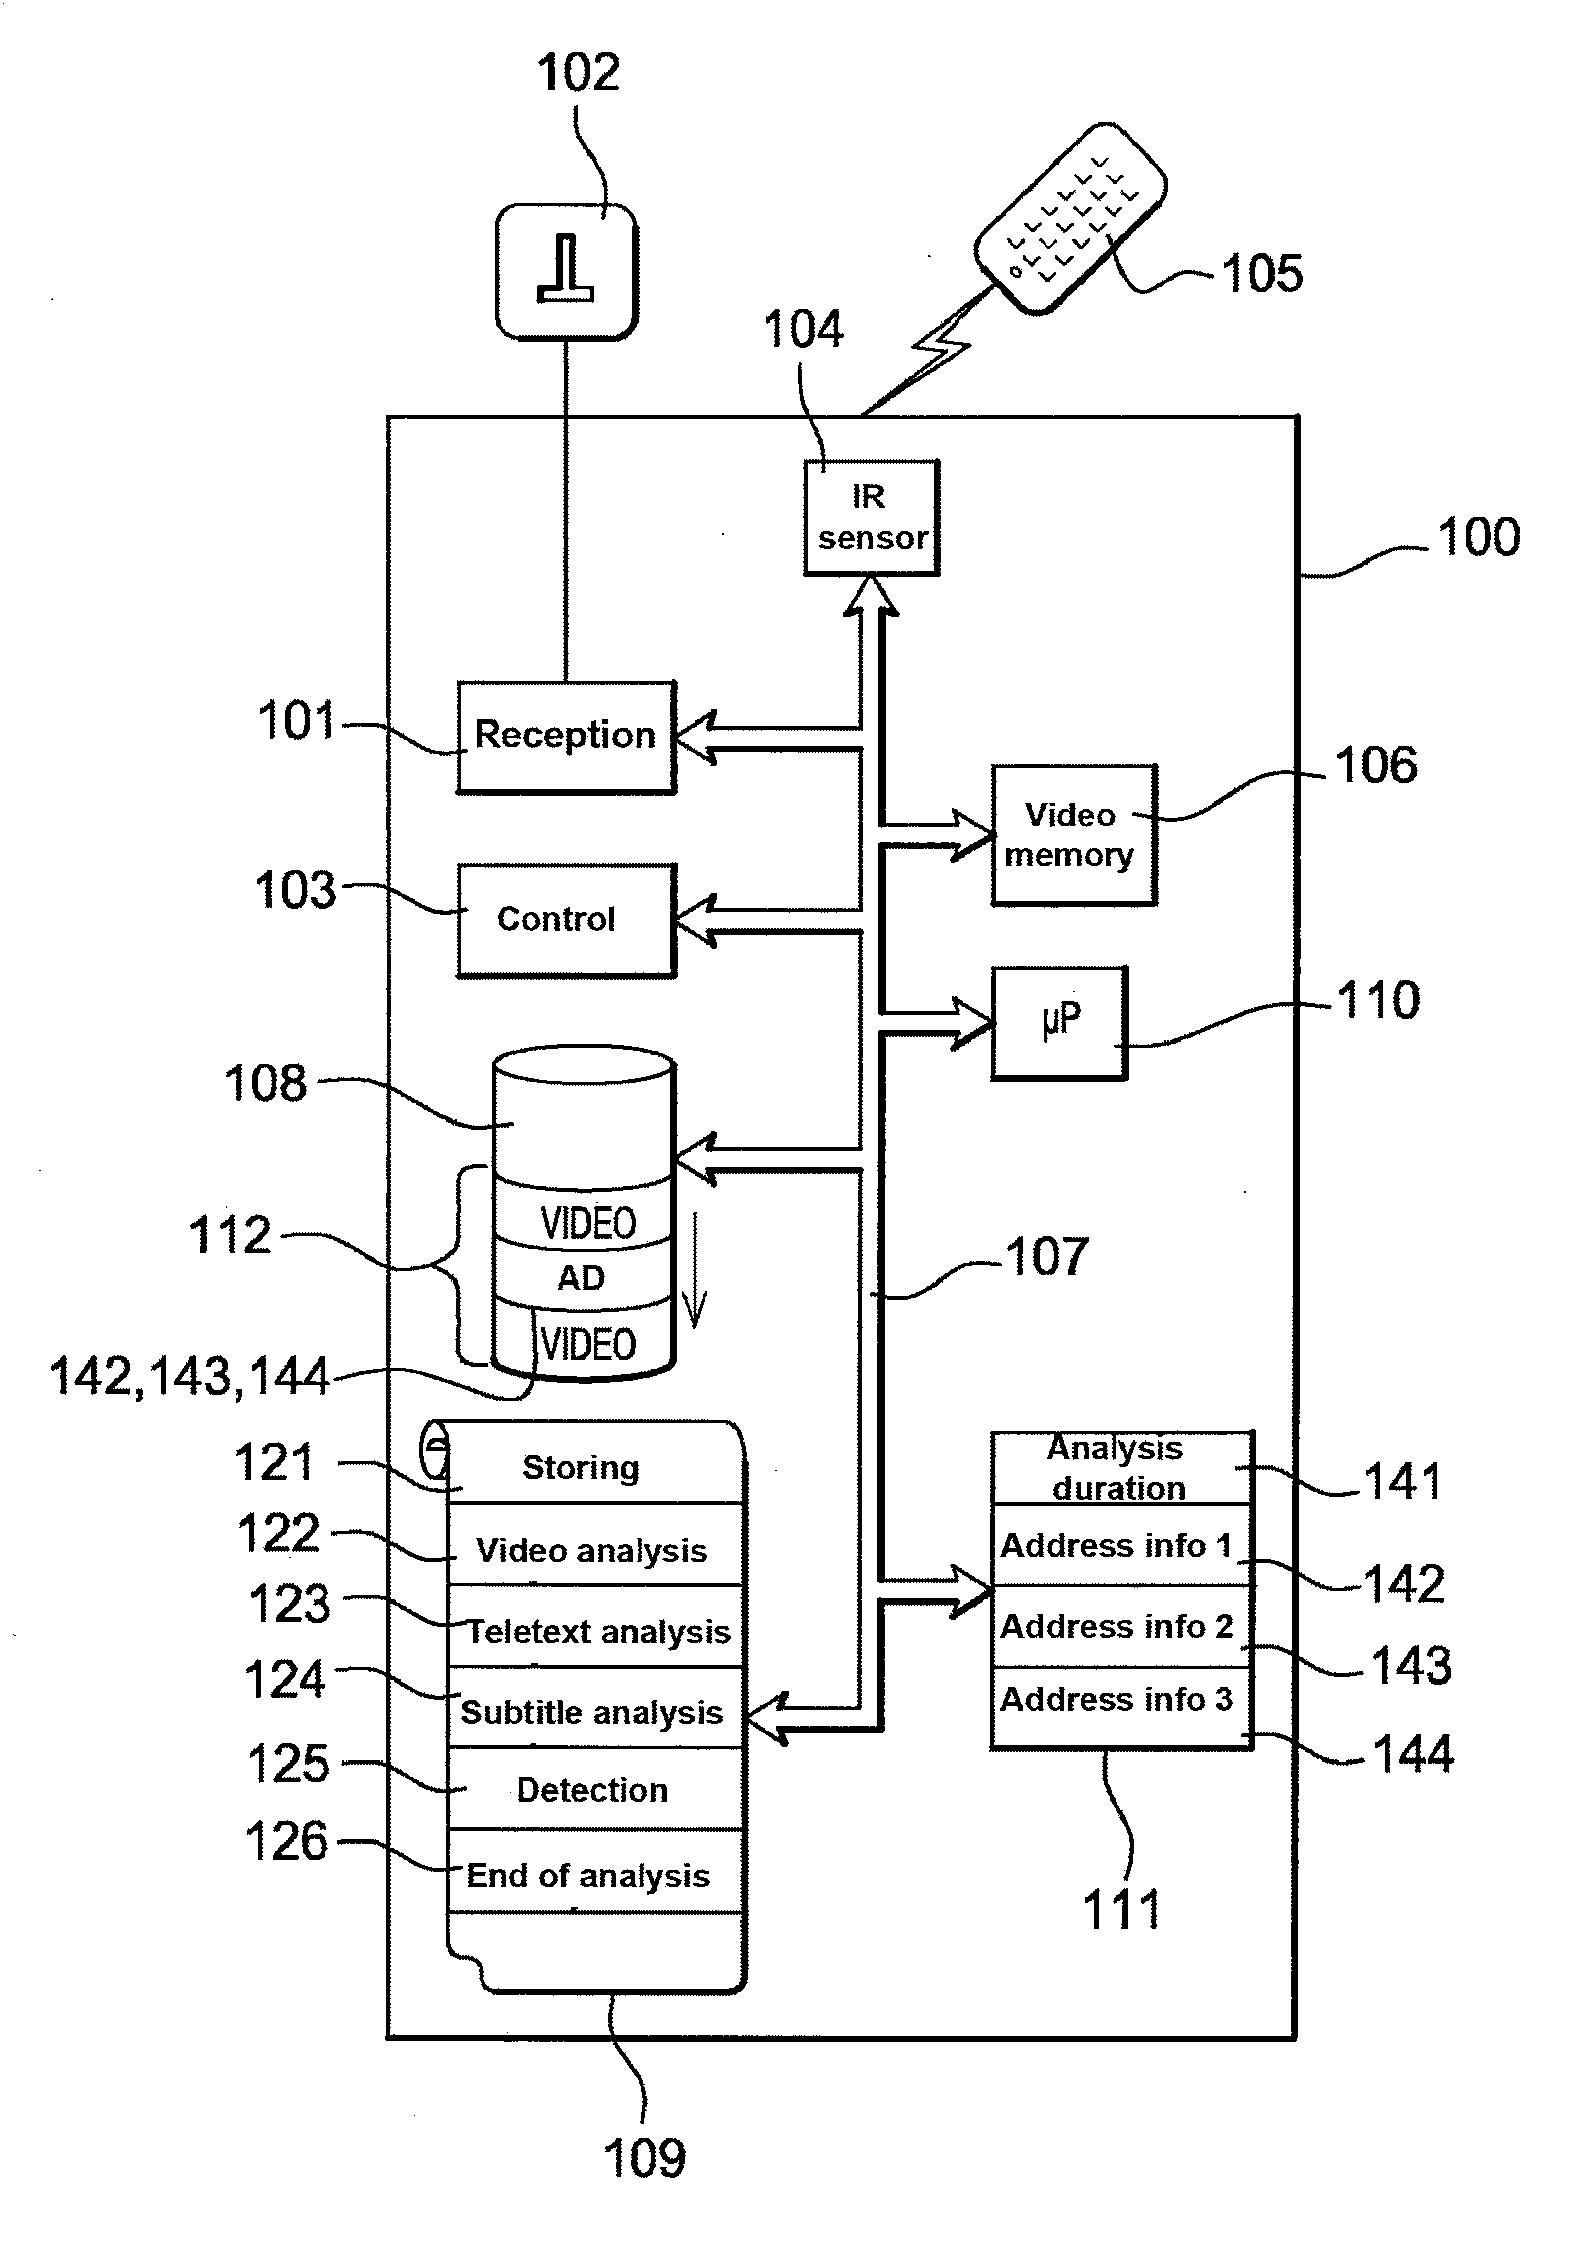 System for managing detection of advertisements in an electronic device, for example in a digital TV decoder